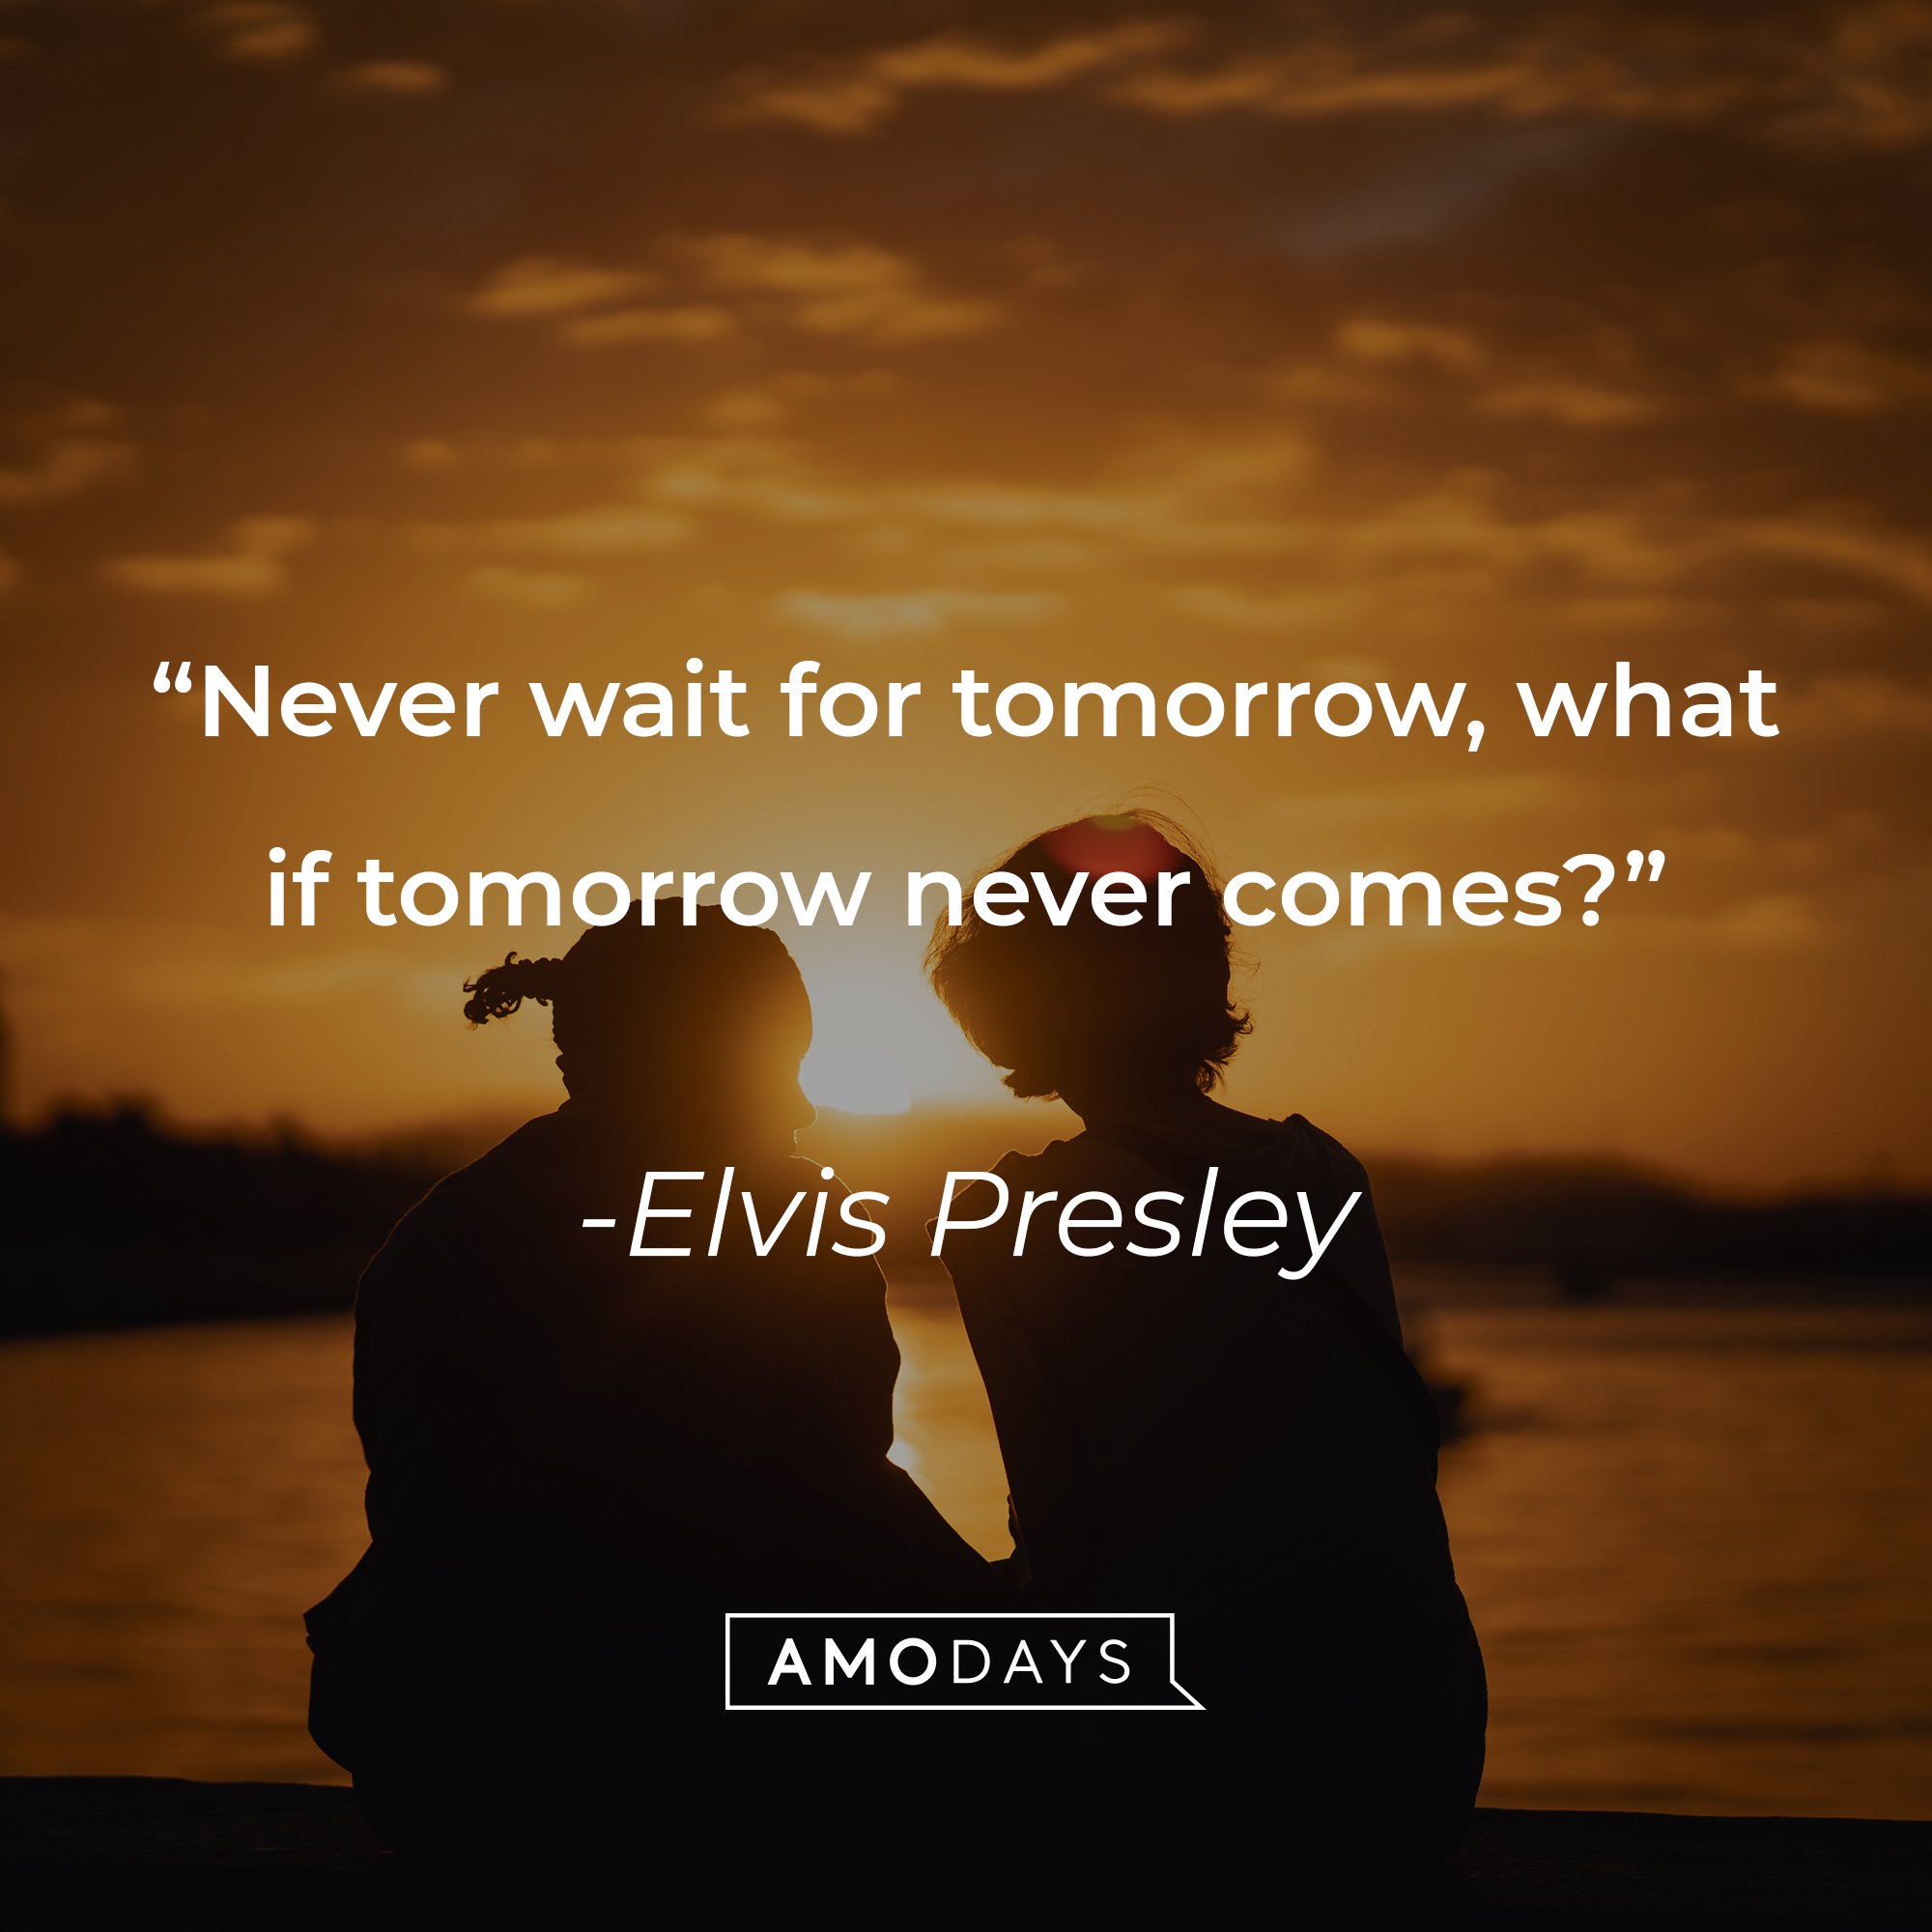 Elvis Presley's quote: "Never wait for tomorrow, what if tomorrow never comes?" | Image: AmoDays